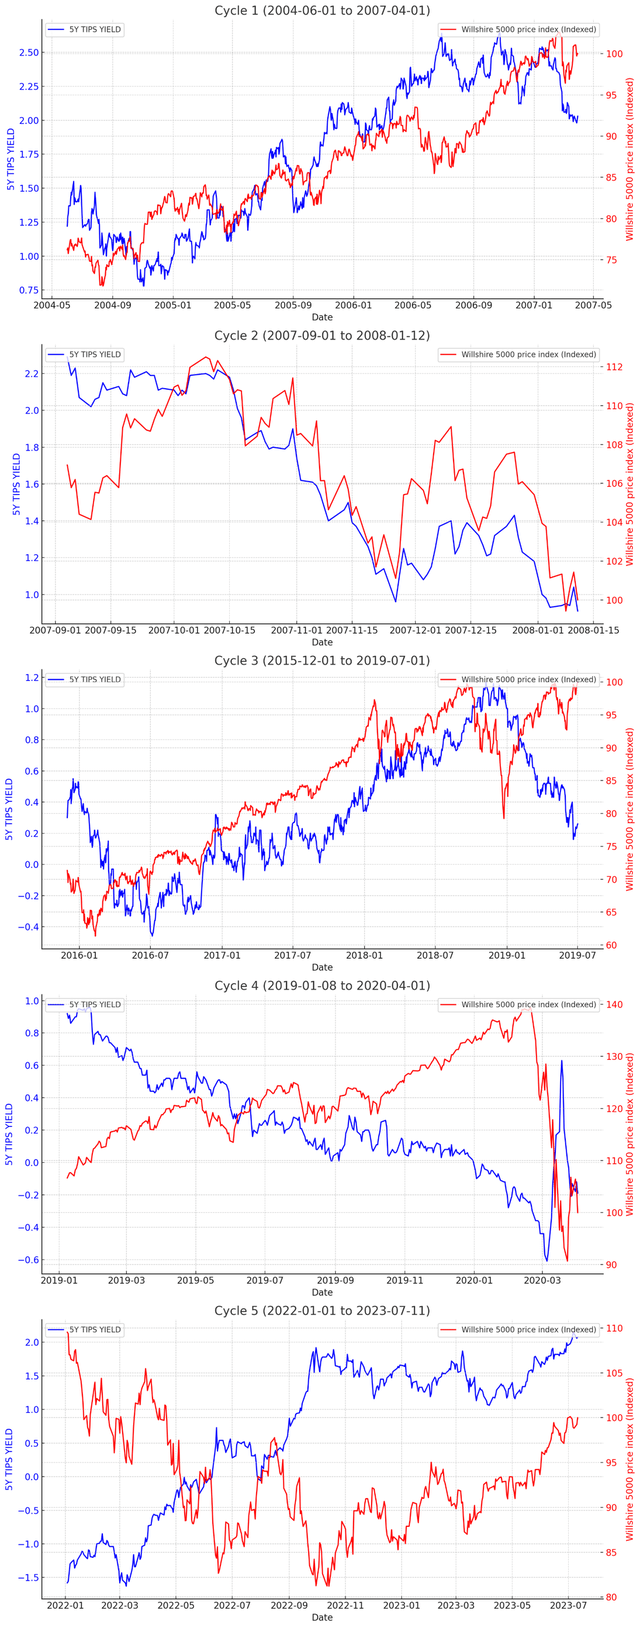 The relationship via 5Y TIPS yield and Wilshire 5000 in cycles